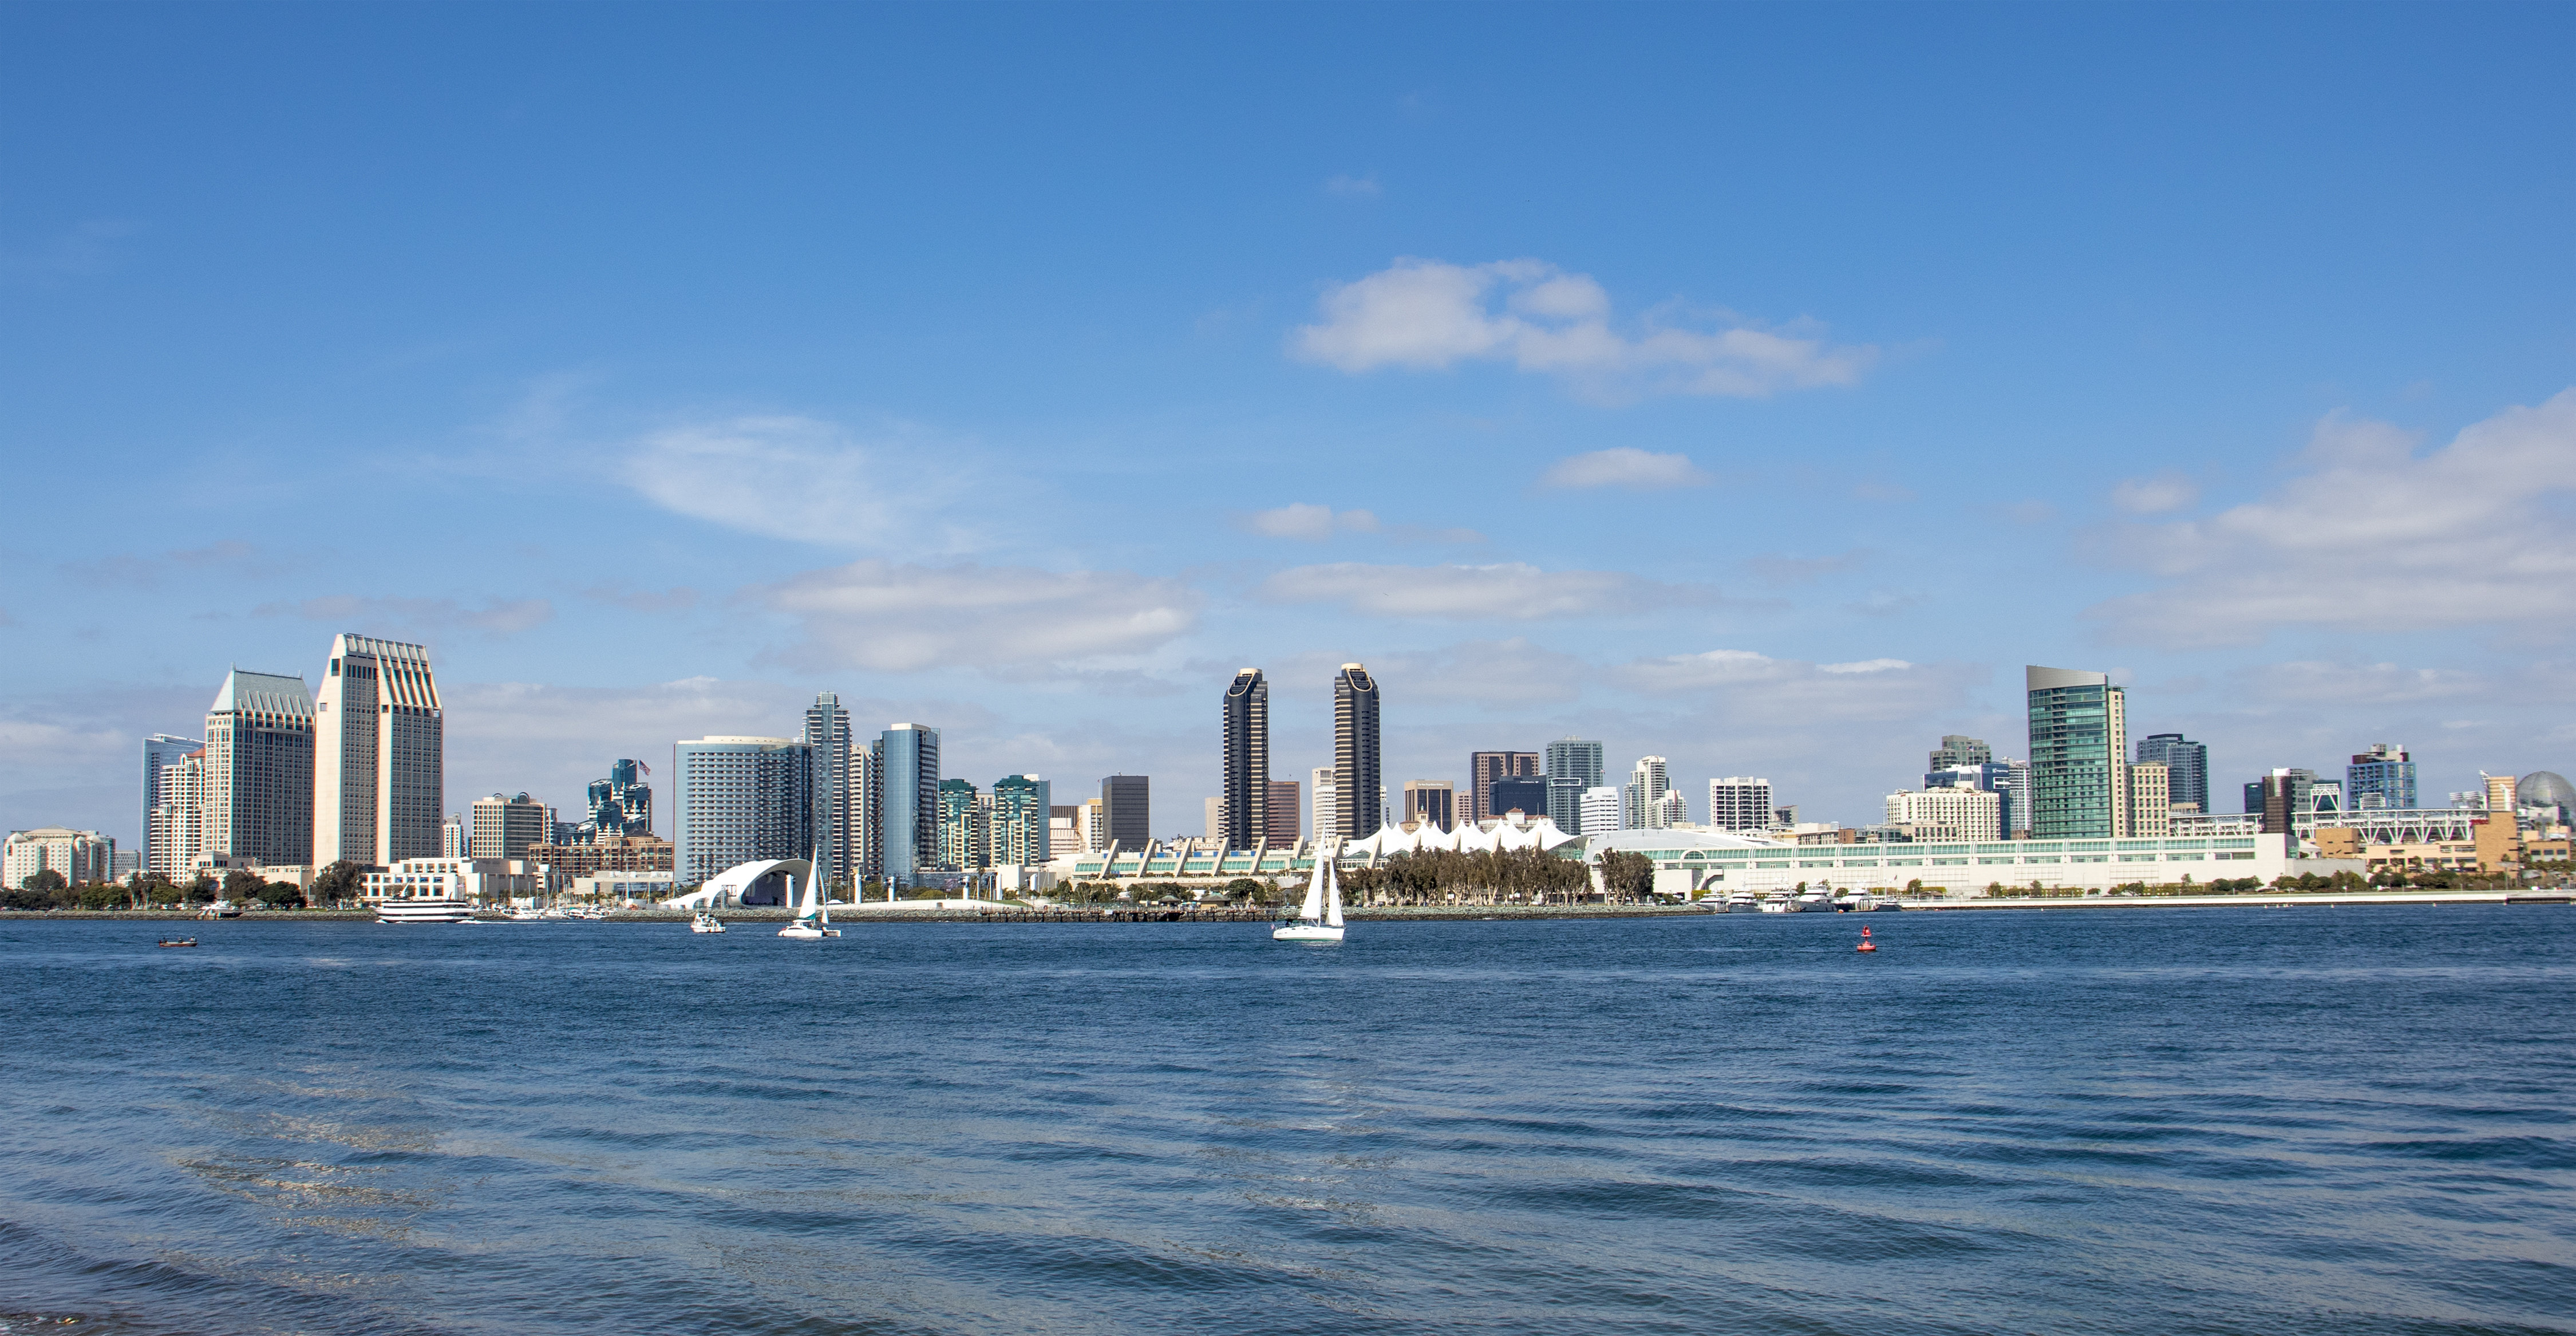 San Diego Convention Center and the San Diego Bay